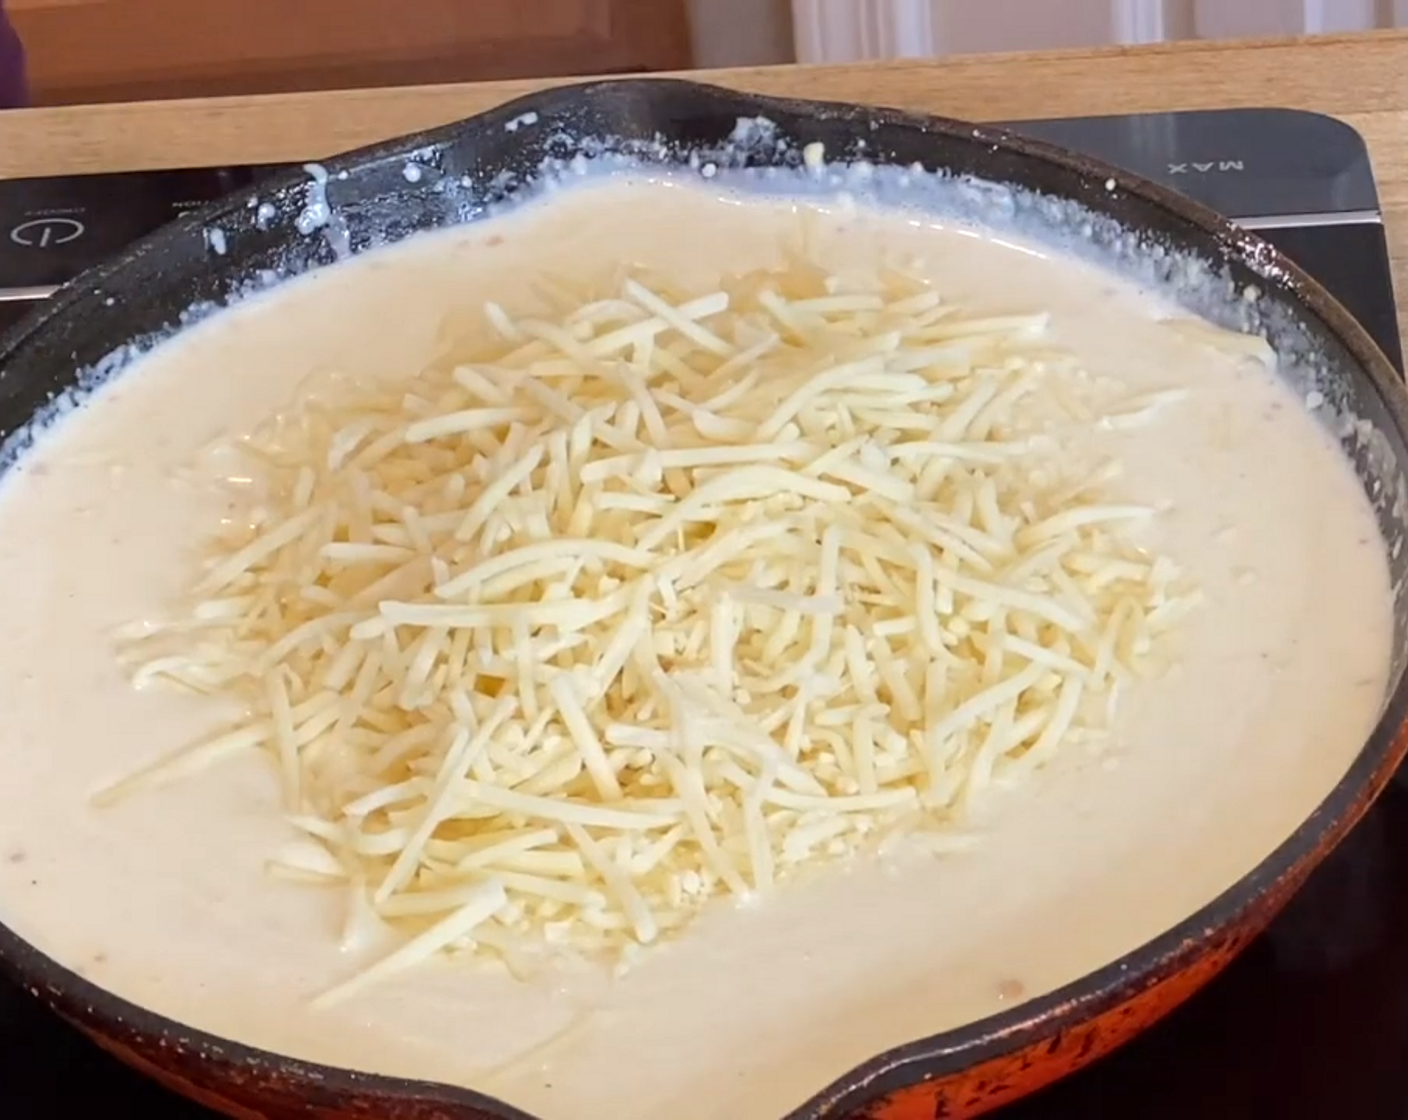 step 8 Reduce the heat to low and add Shredded White Cheddar Cheese (2 cups). Stir until melted.